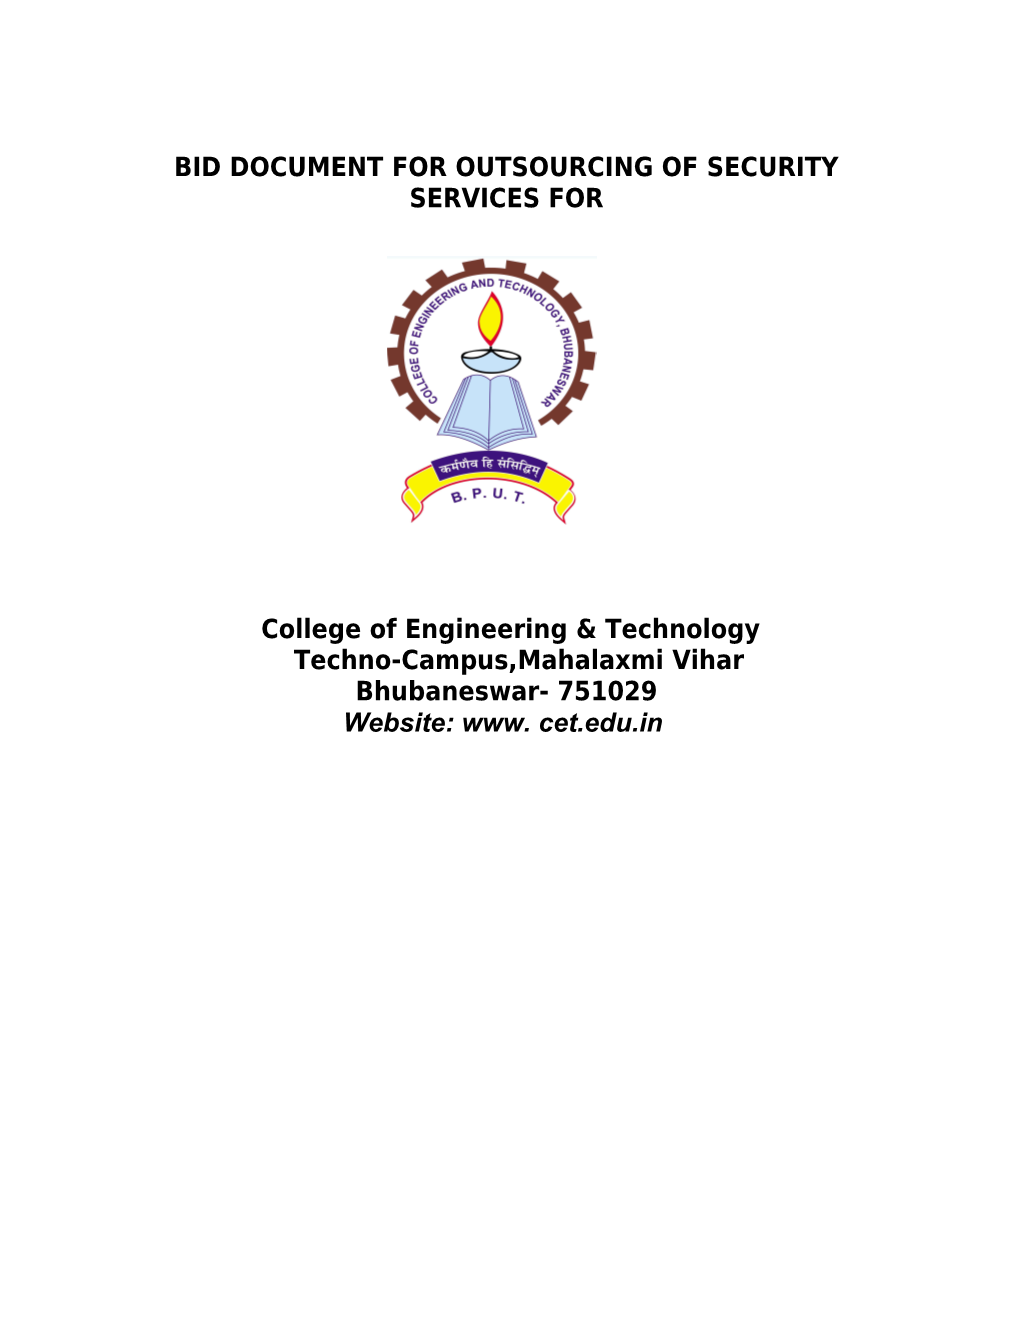 Bid Document for Outsourcing of Security